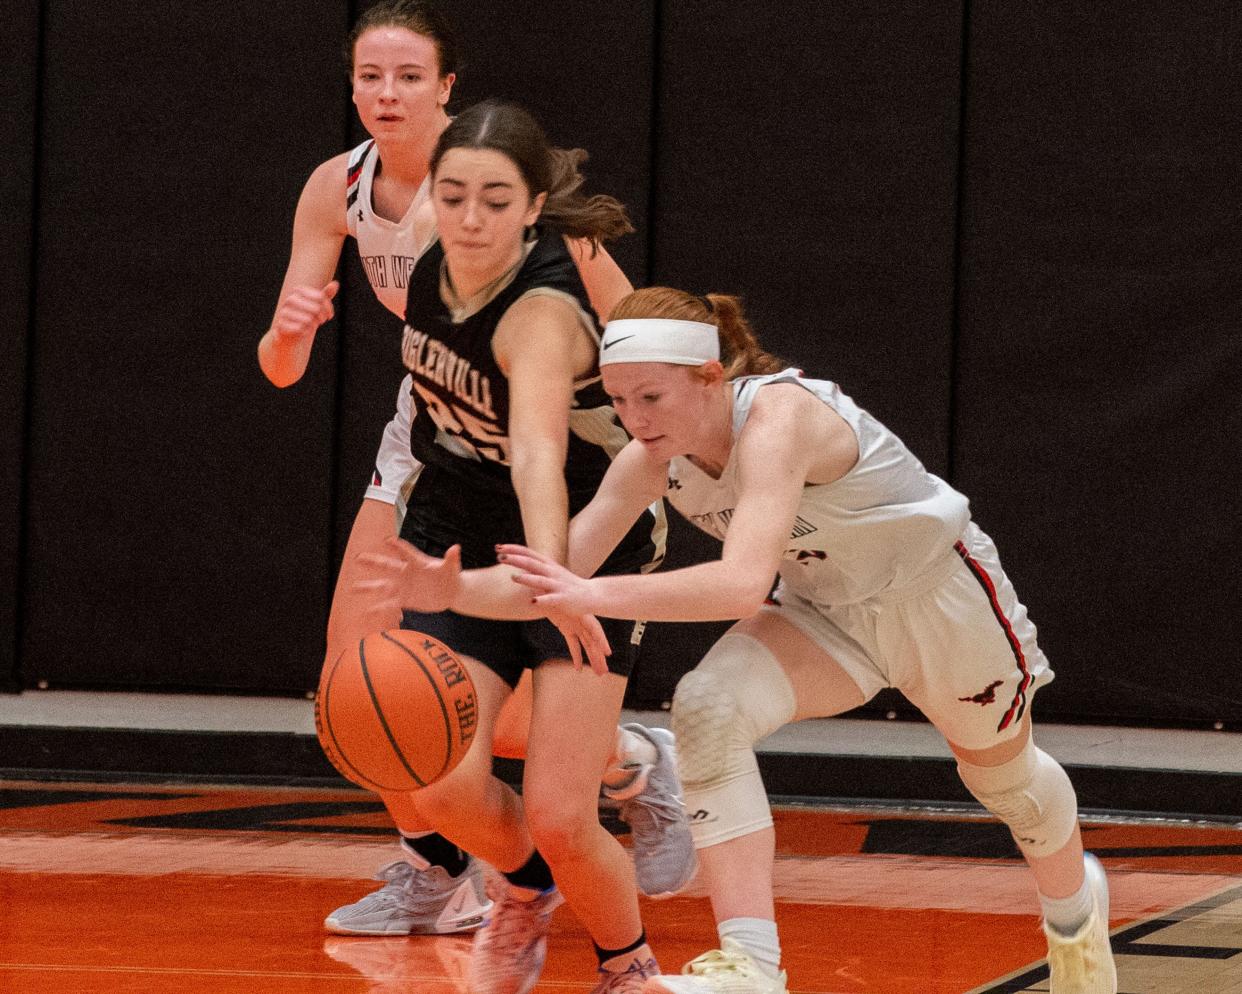 Biglerville’s Claire Roberts, left, and South Western’s McKayla Green go for a loose ball in the first round of the Hanover Hawkettes Holiday Classic on Tuesday, Dec. 27, 2022. The Mustangs won 44-34.